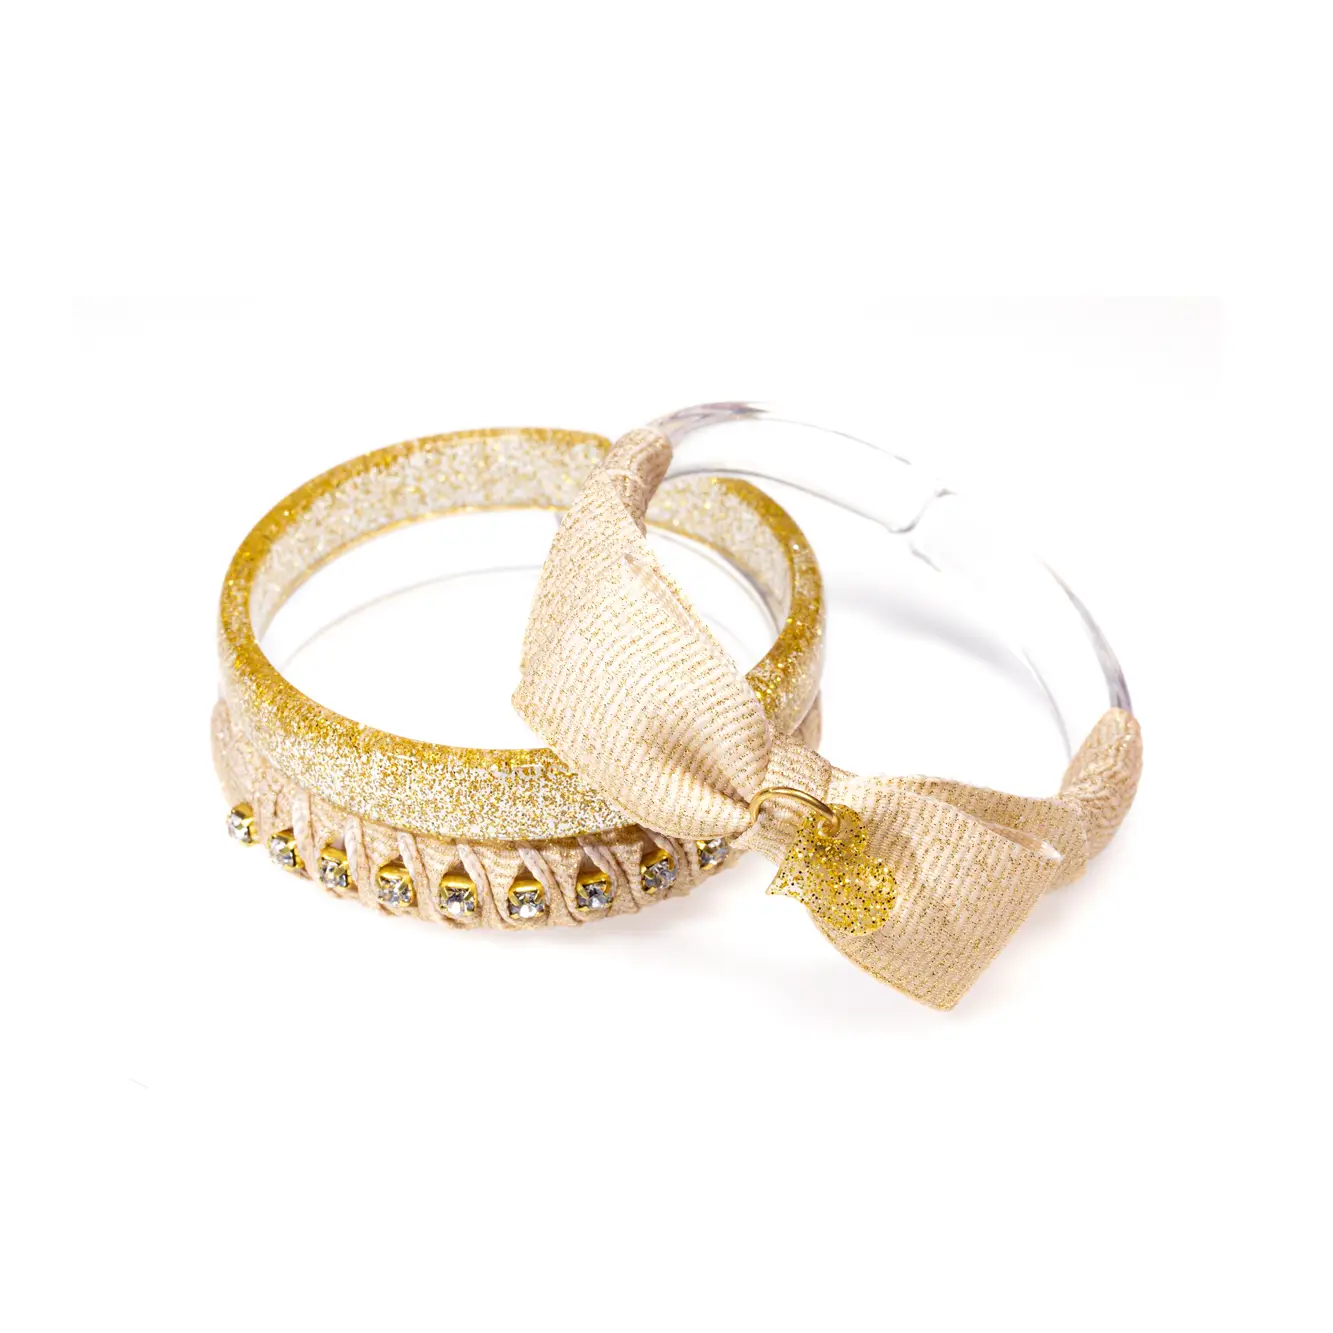 Lilies & Roses Fancy Gold Fabric Bangle Set/3